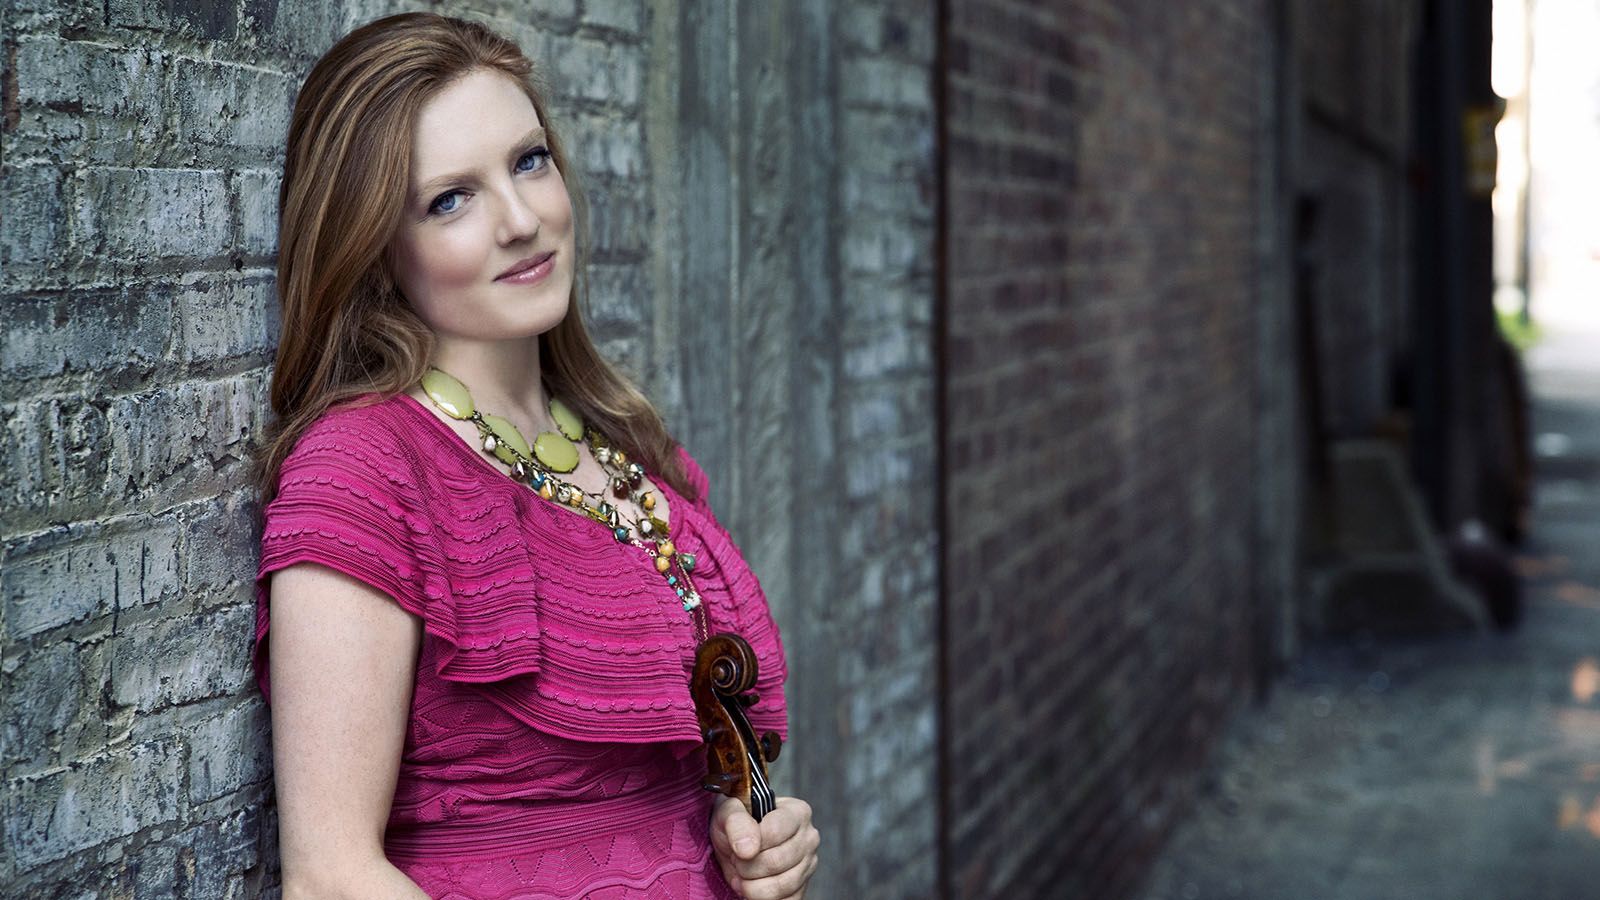 Violinist Rachel Barton Pine will join the Fort Wayne Philharmonic for their performance at Auer Performance Hall on the campus of Purdue University Fort Wayne on Saturday, March 9.